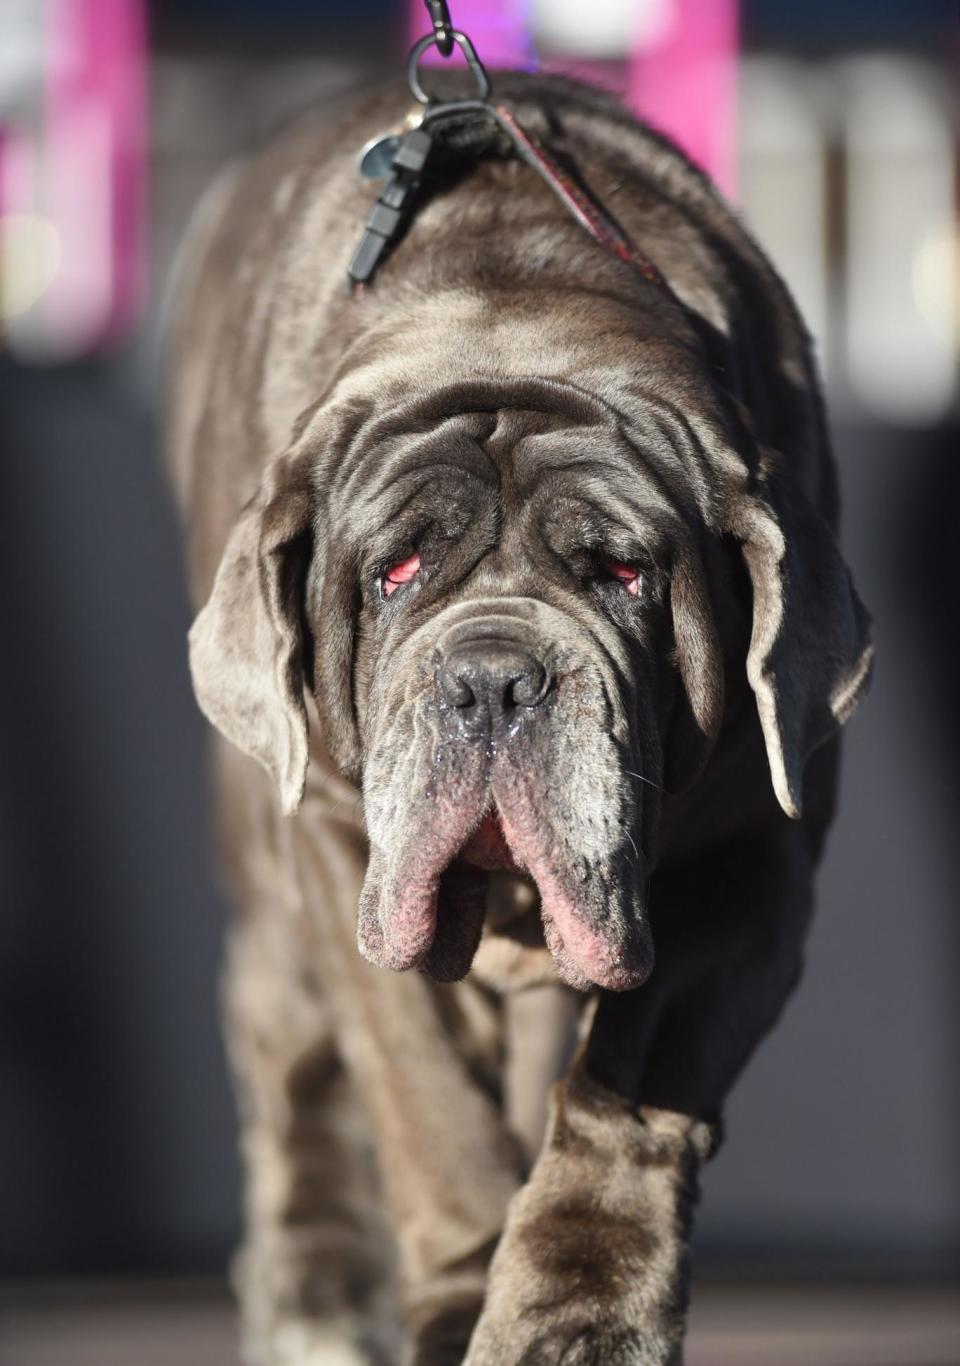 Last year's World's Ugliest Dog Competition winner Martha (AFP/Getty Images)